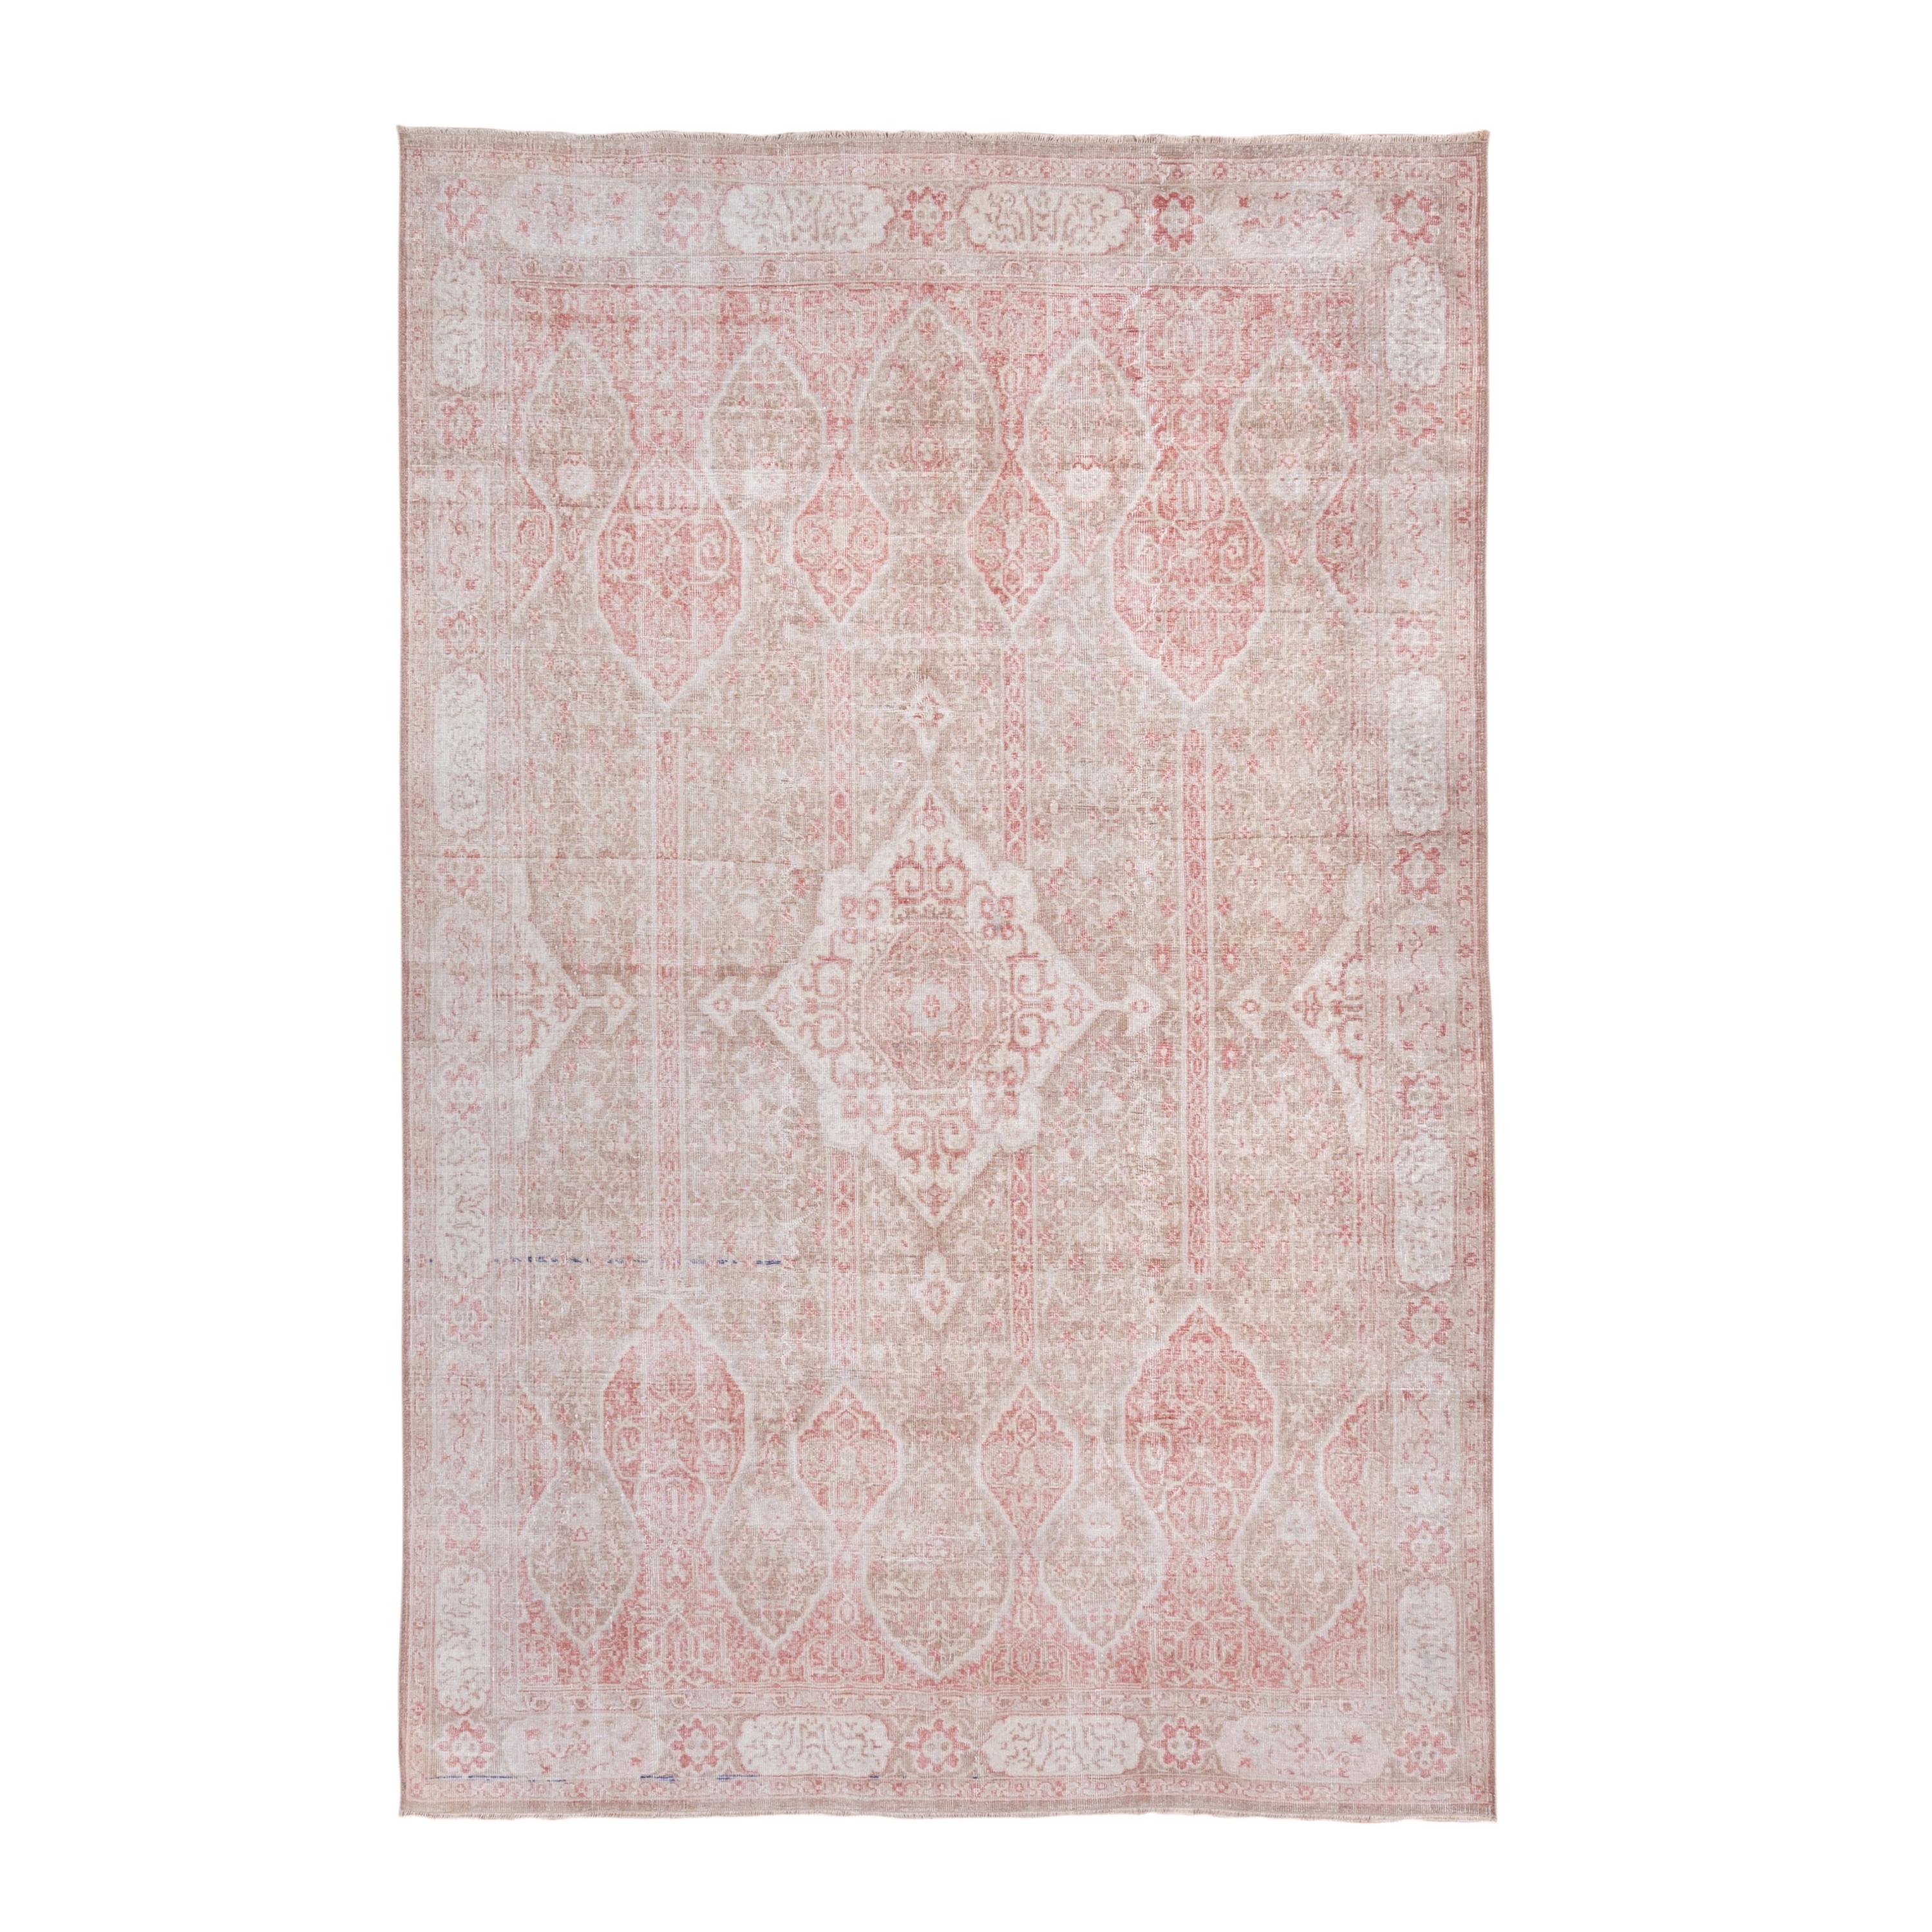 Unique Oushak Rug, Pink, Light Brown and Ivory For Sale